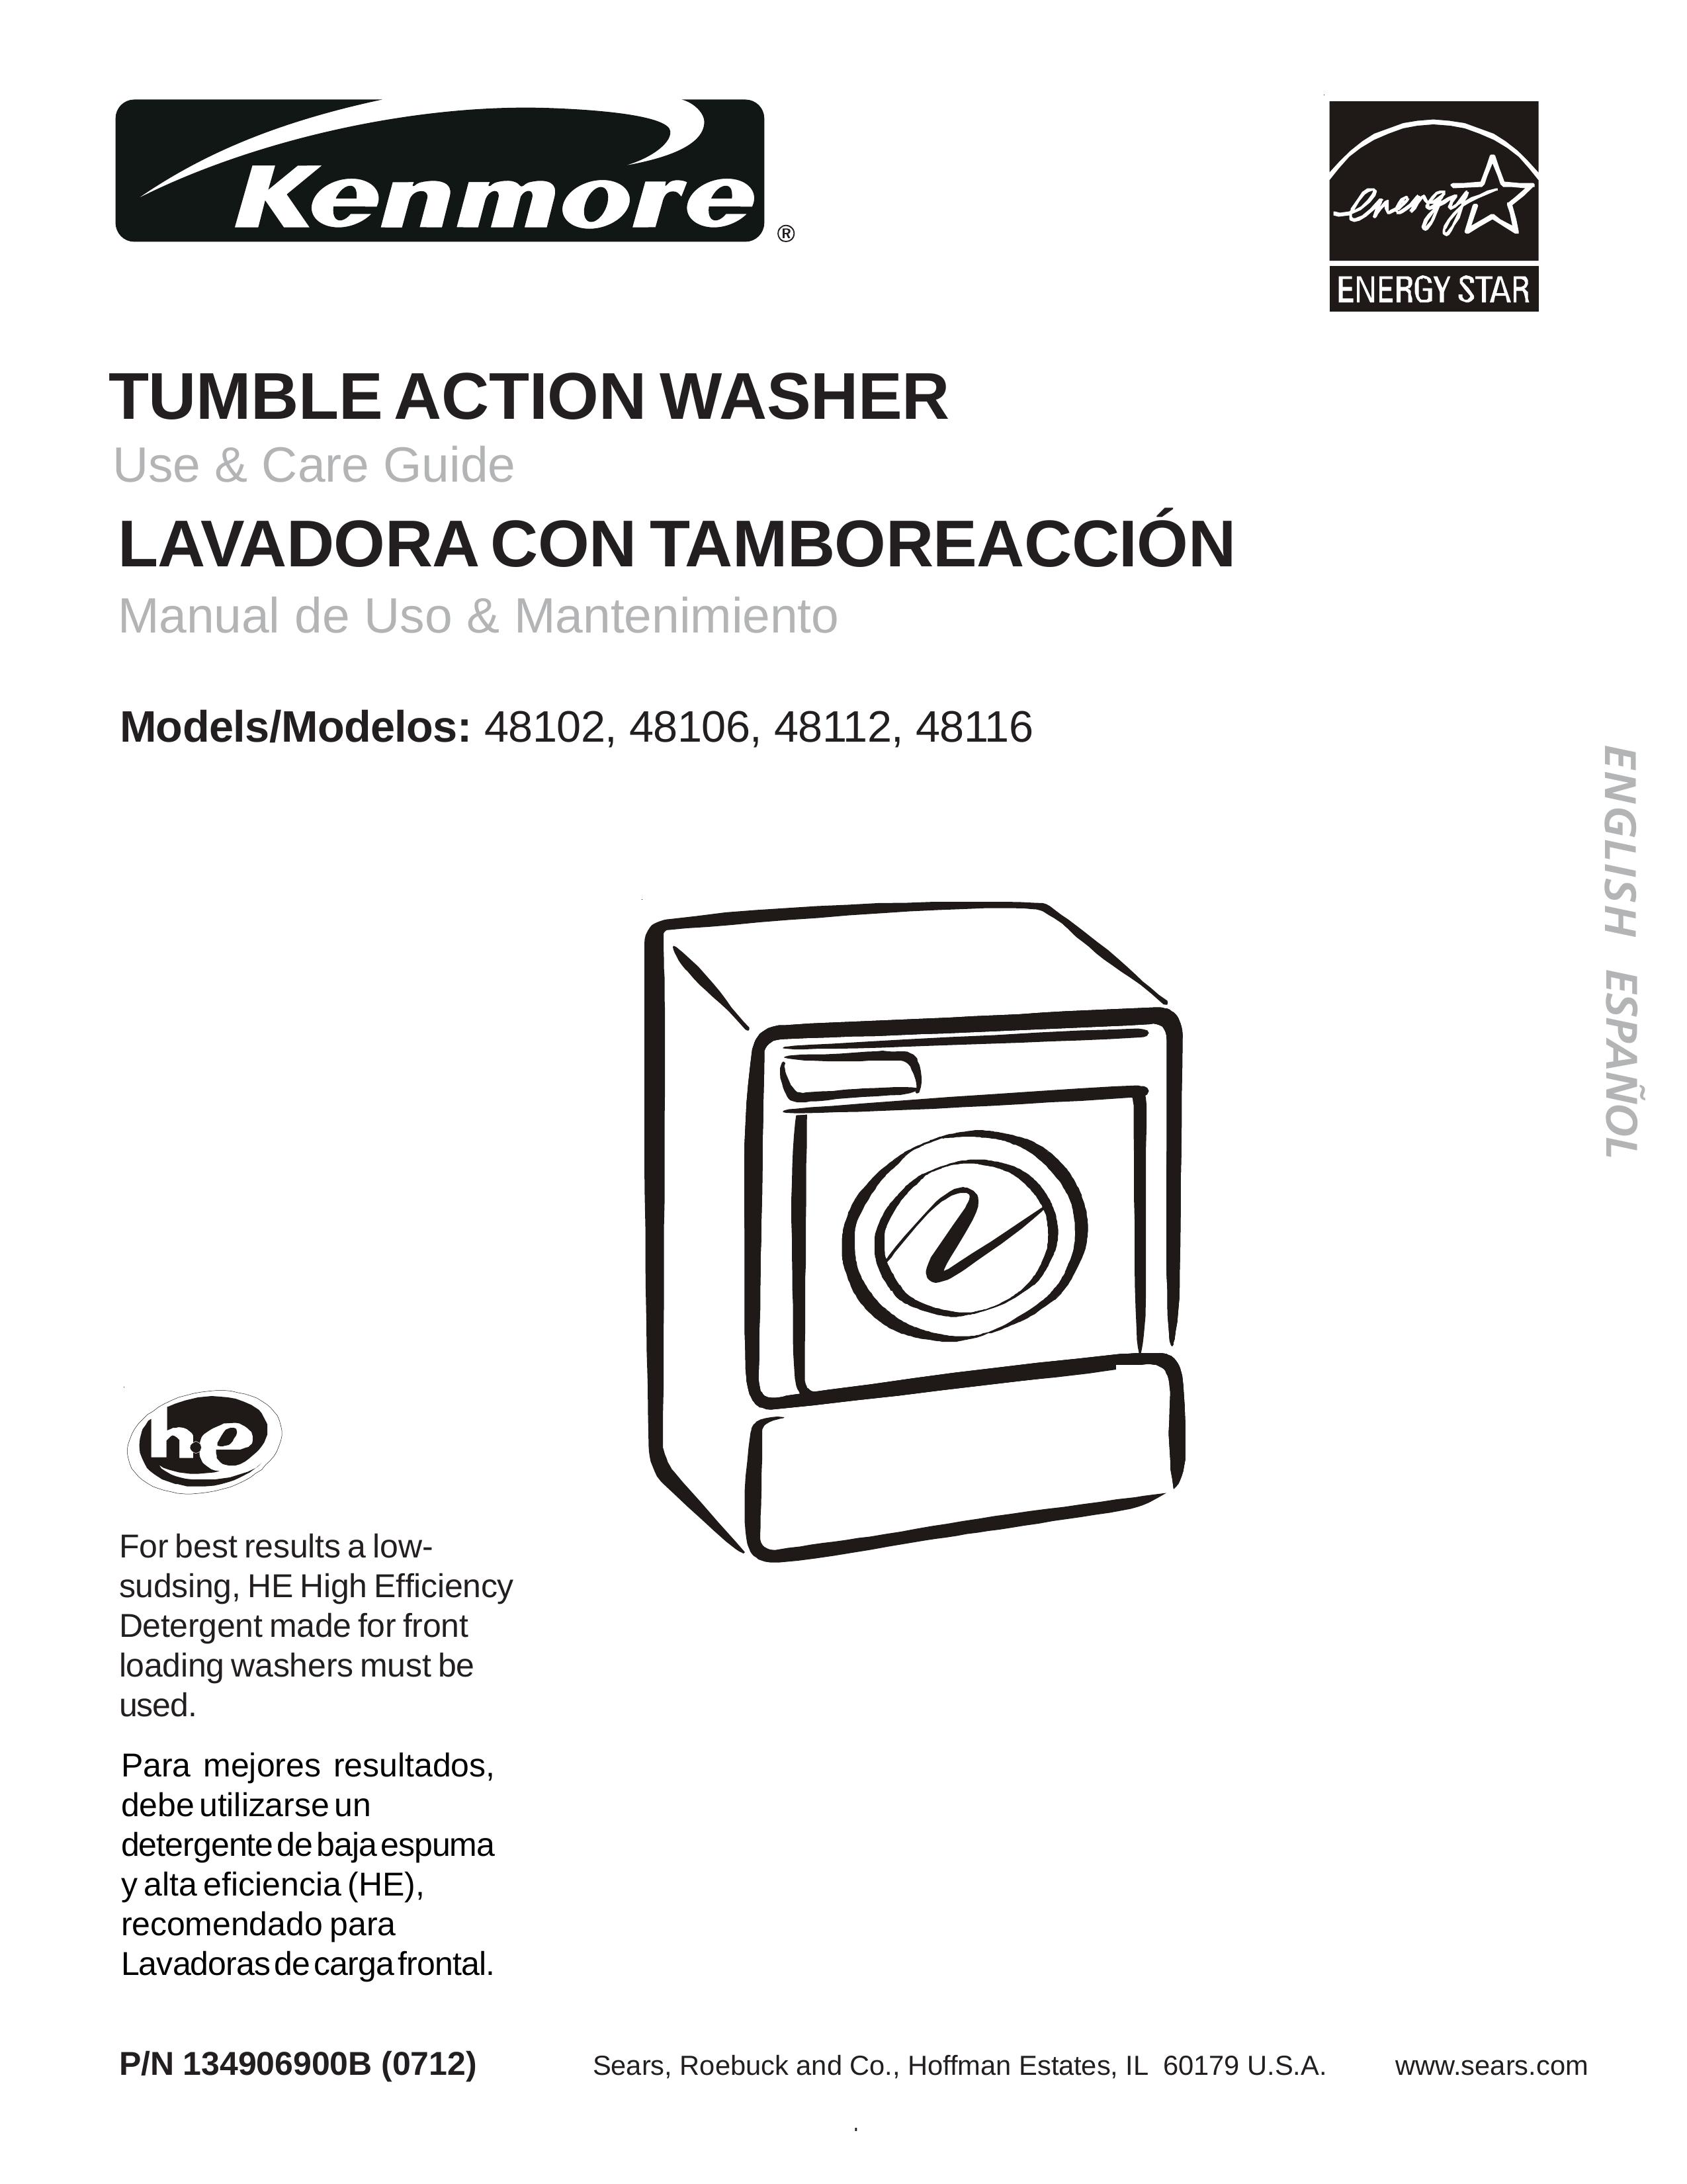 Kenmore 48102 Clothes Dryer User Manual